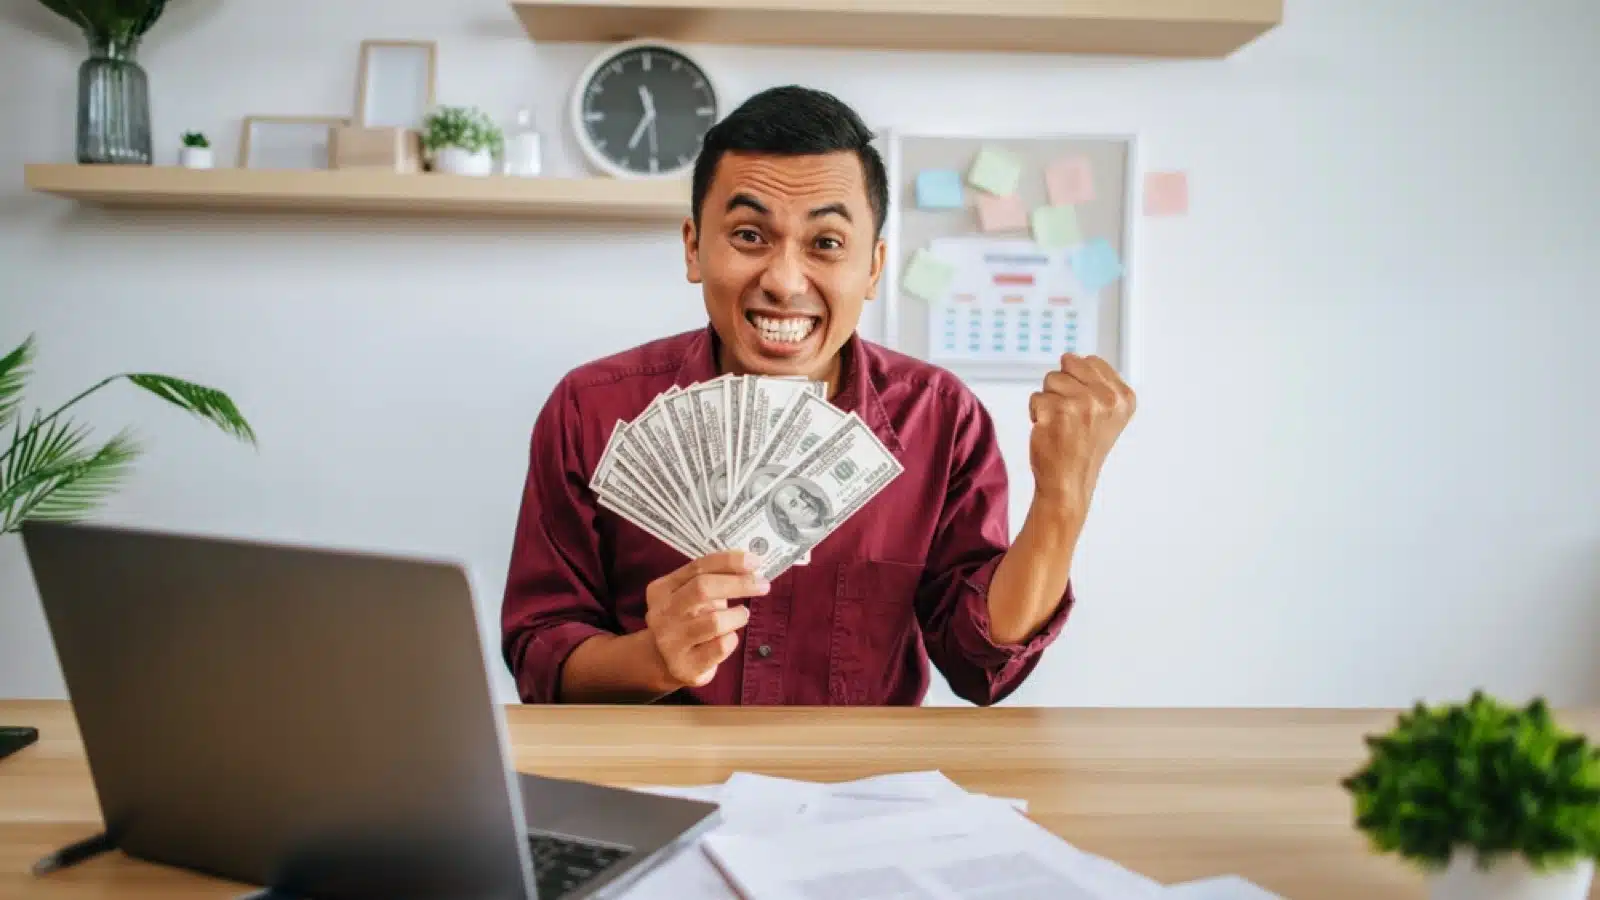 Man excited with money